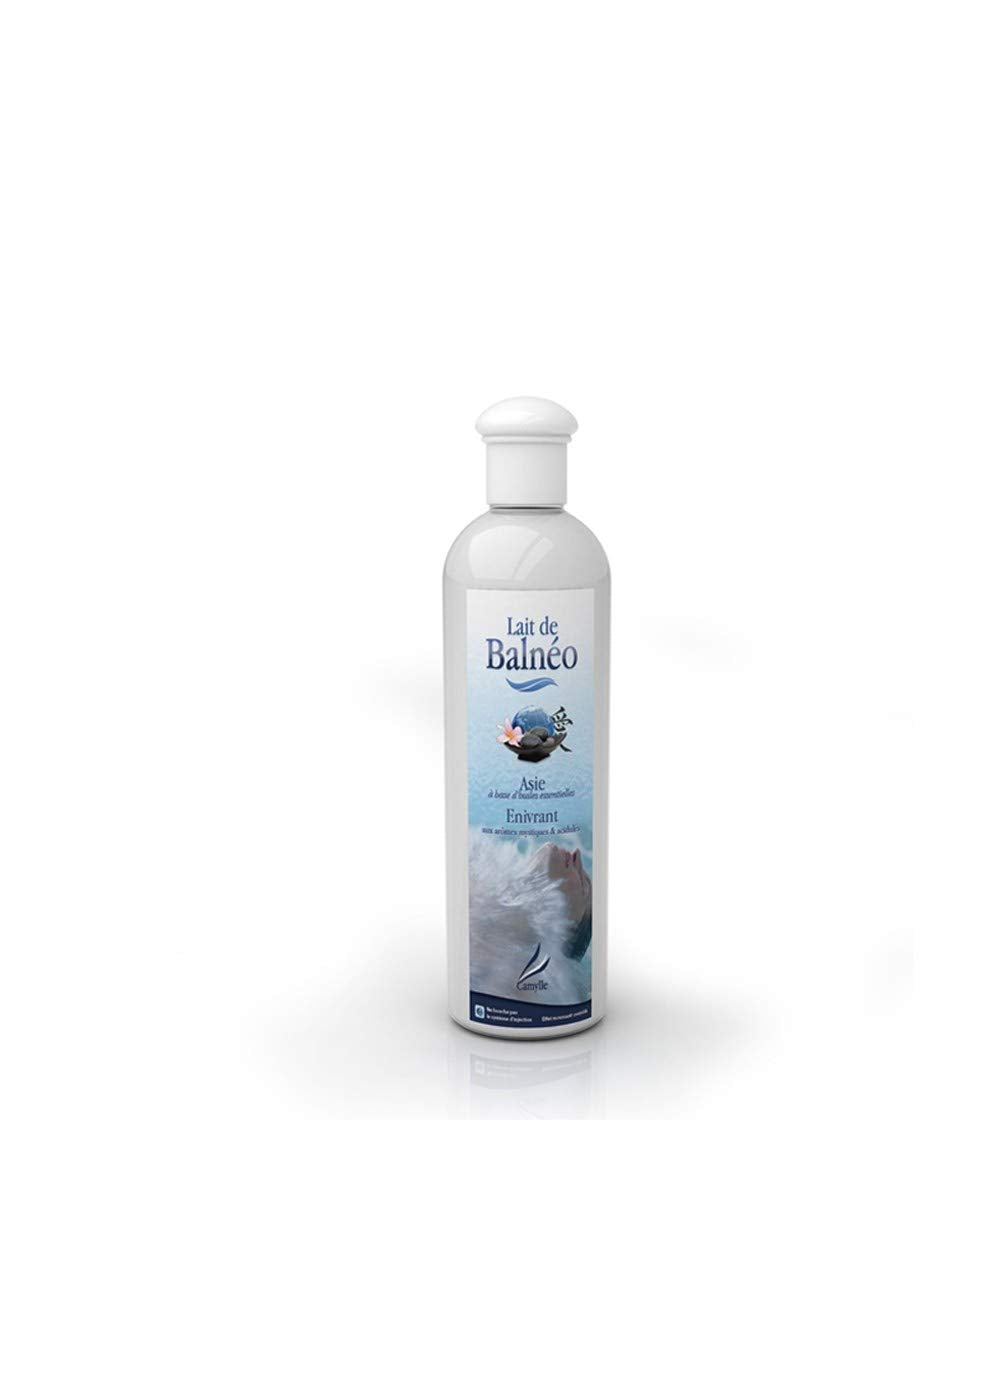 Camylle - Whirlpool Bath Milk Asie - Emulsion of Essential Oils for Hydrotherapy Baths, Bubble Baths and Foot Spas - Exhilarating with acidulous and Mystic Aromas - 250ml